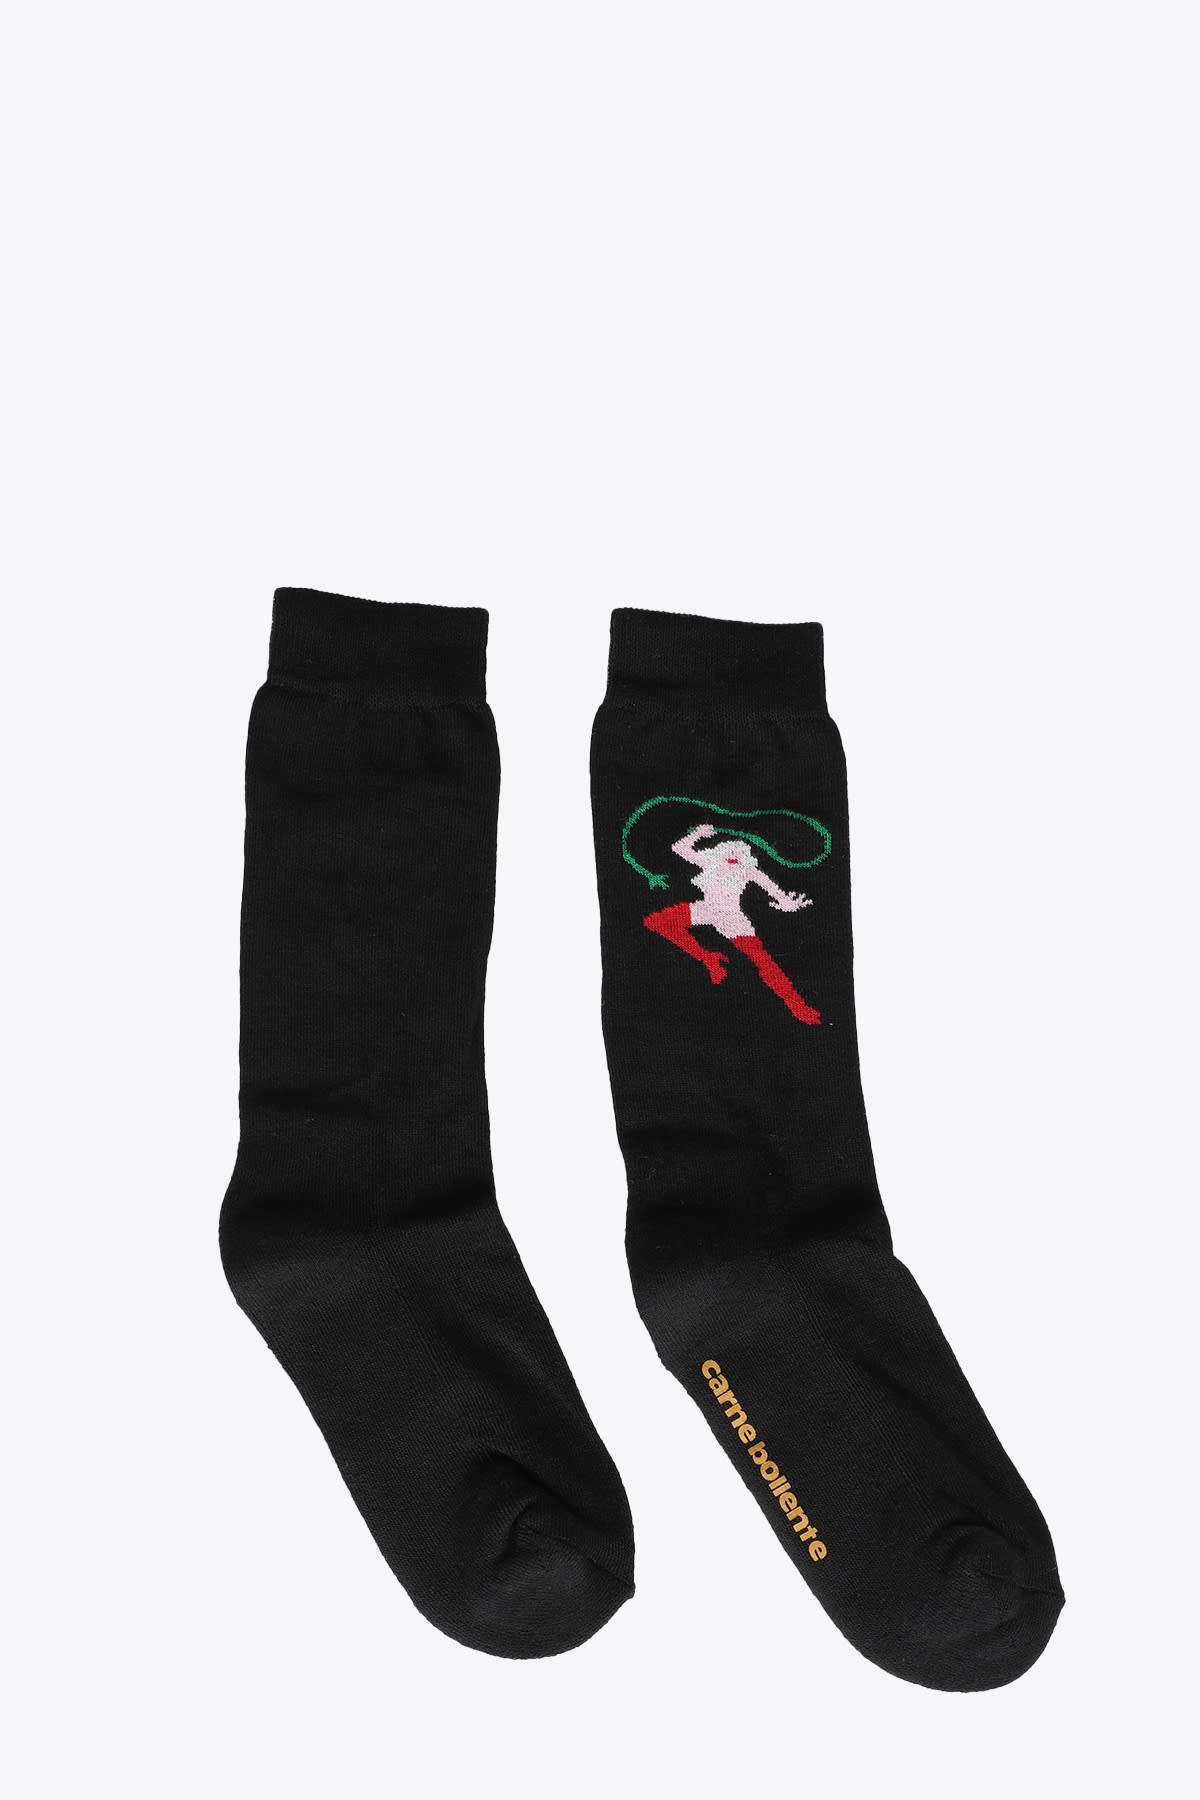 Carne Bollente Domination Fantaisies black ribbed cotton socks with embroidery - Domination fantasies